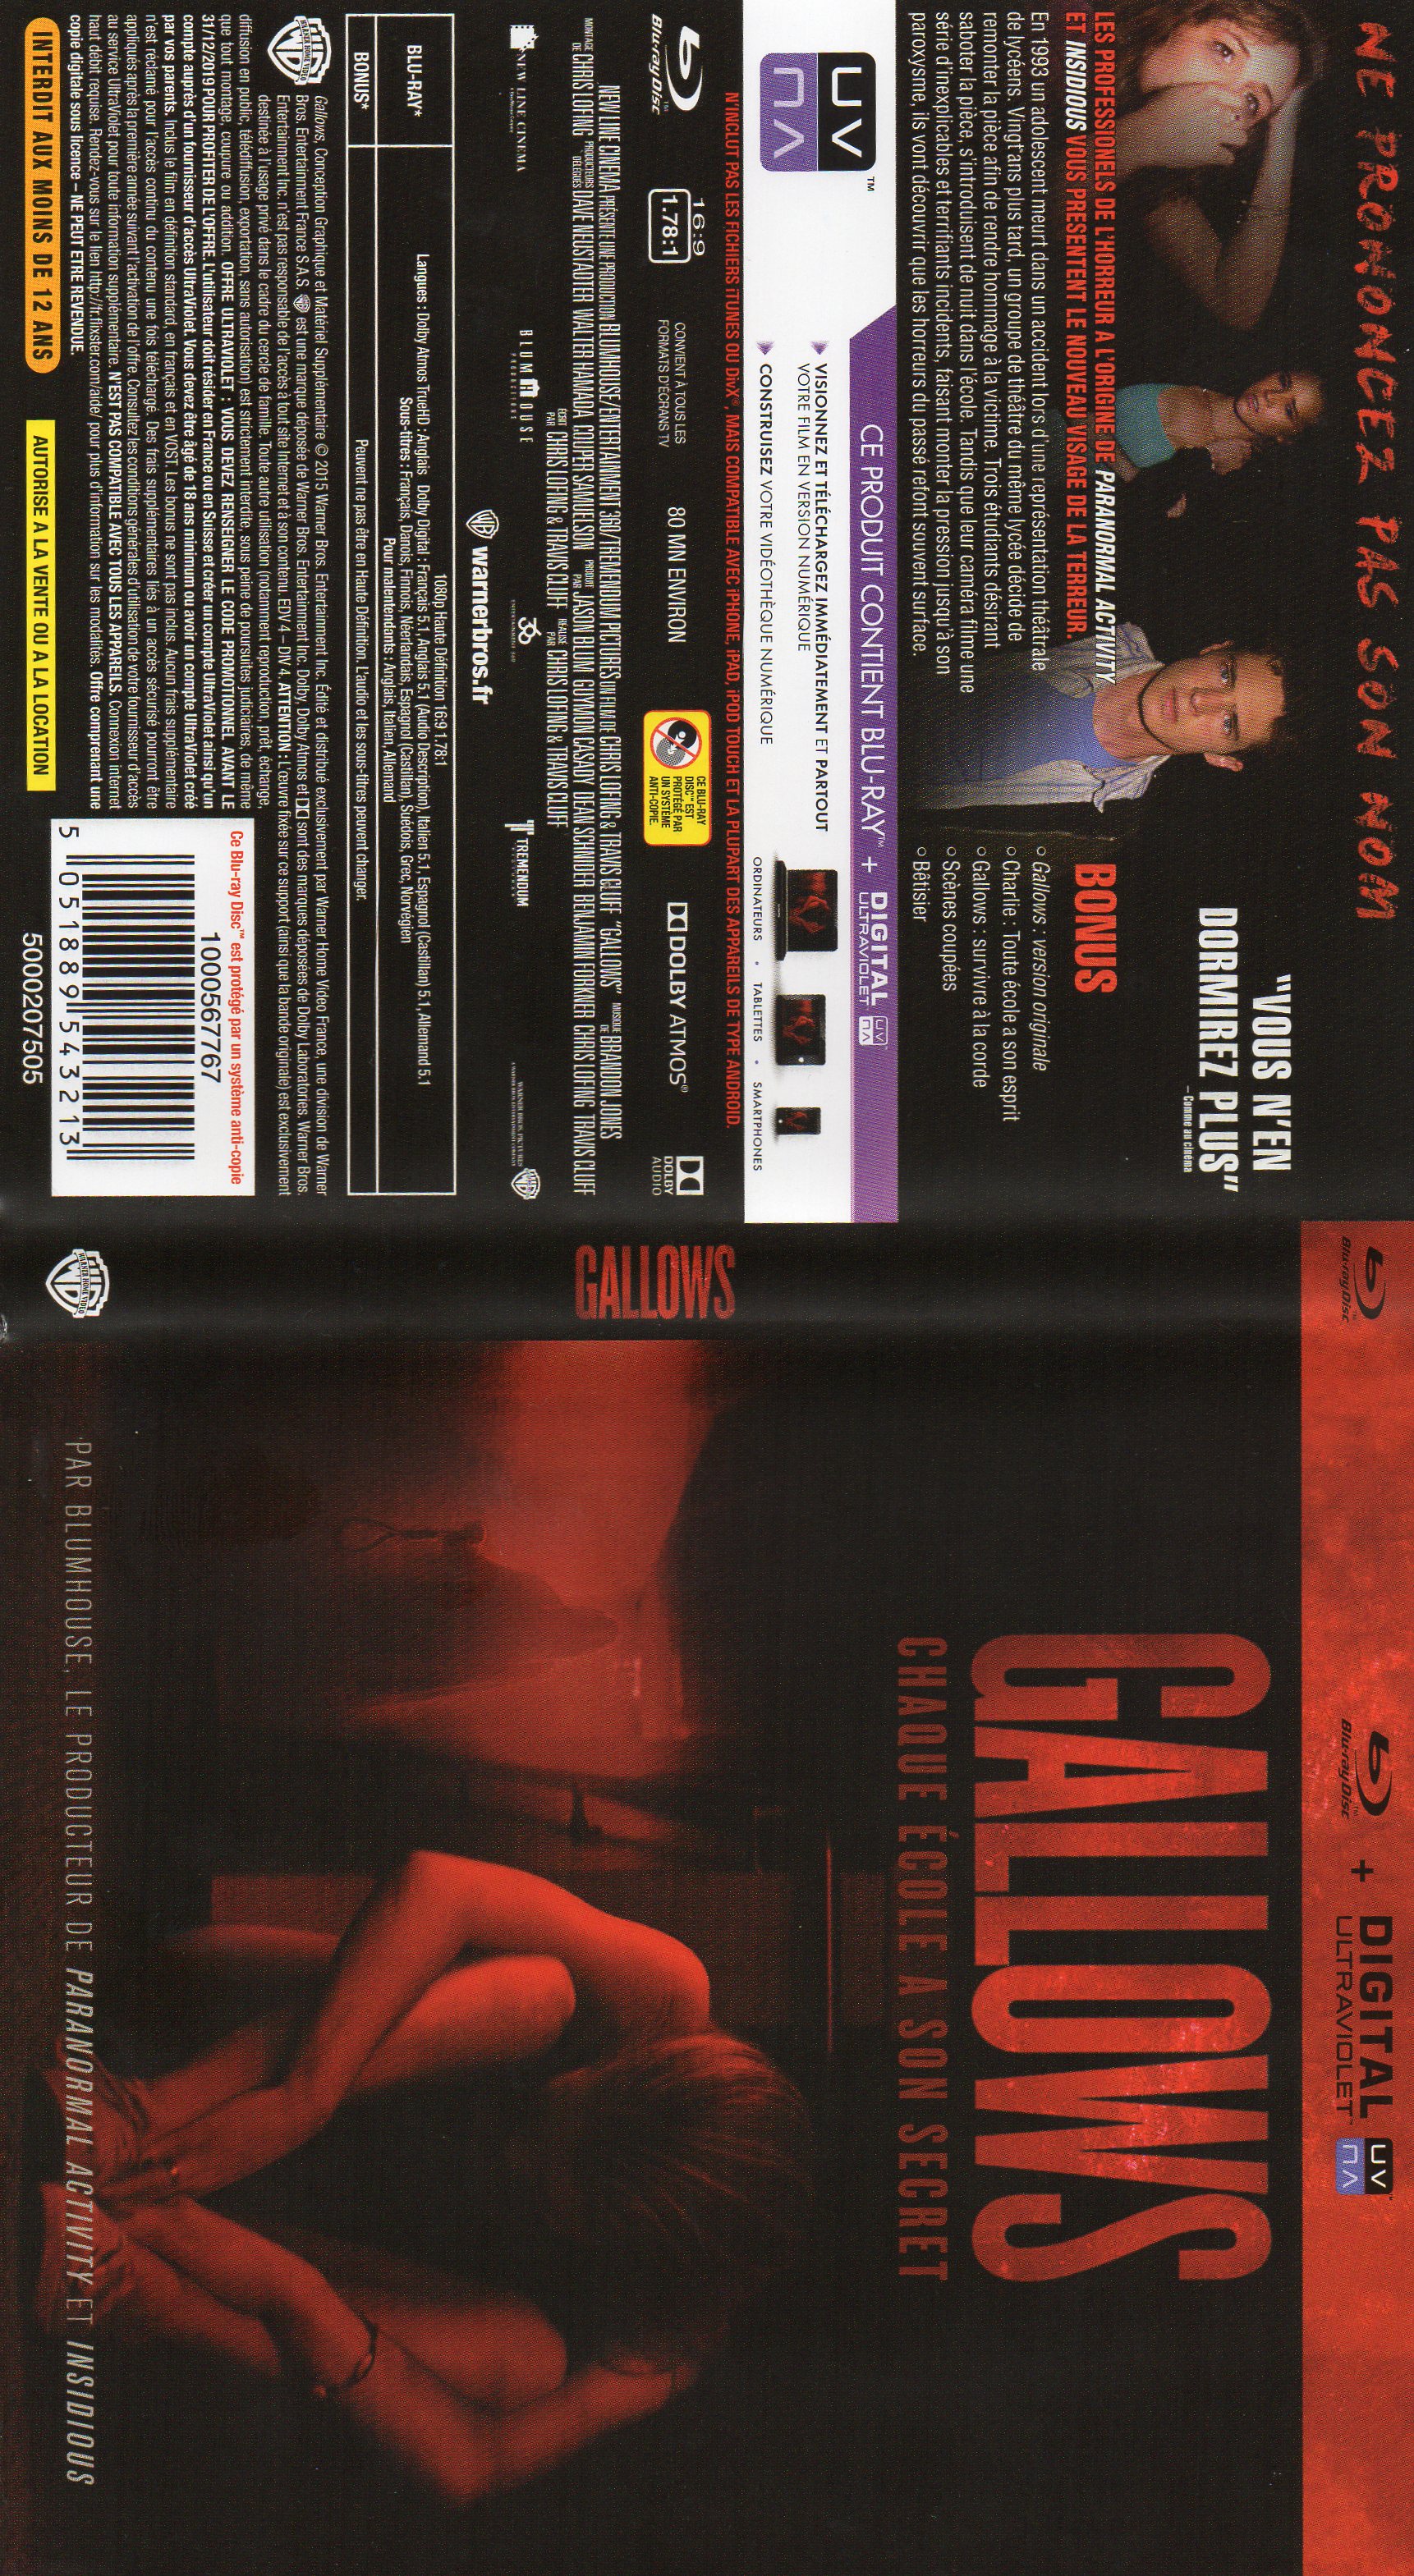 Jaquette DVD Gallows (BLU-RAY)